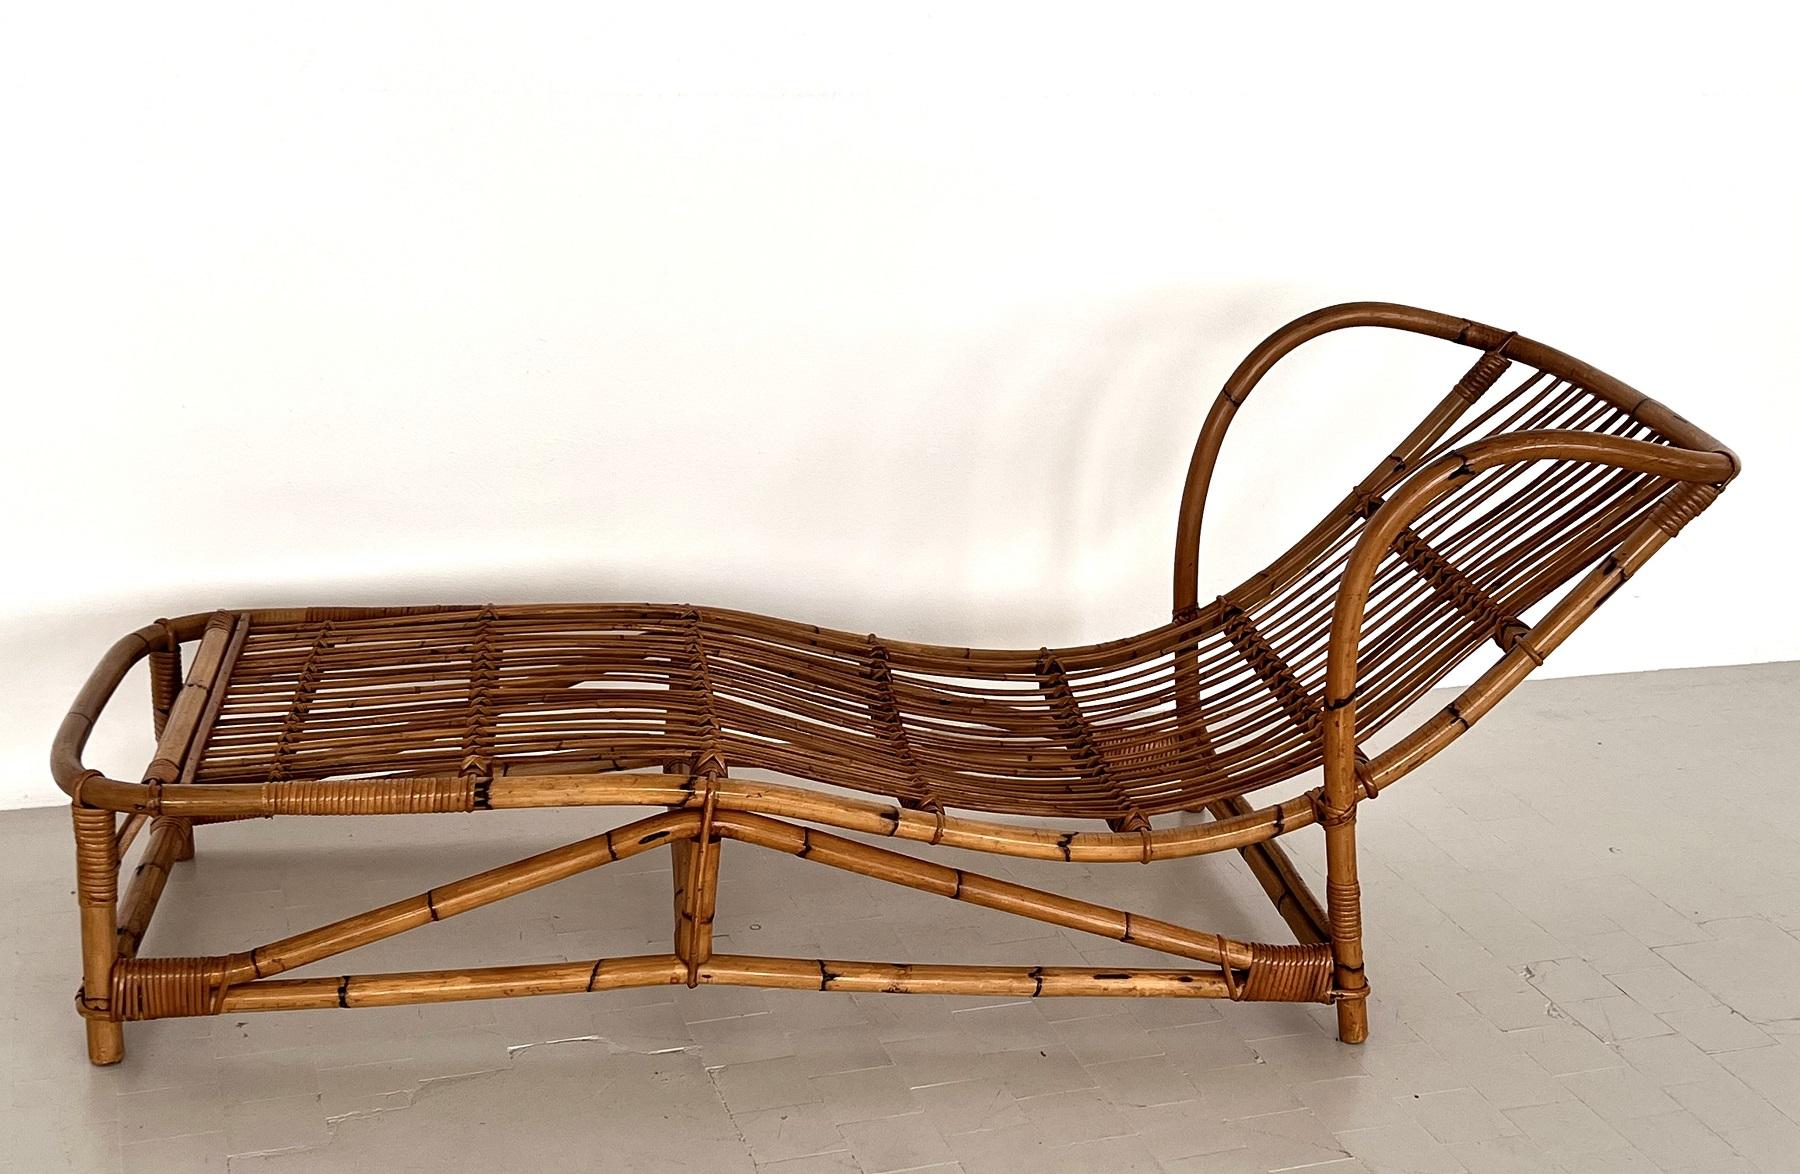 20th Century Italian Midcentury Organic Bamboo Daybed or Sunbed For Sale